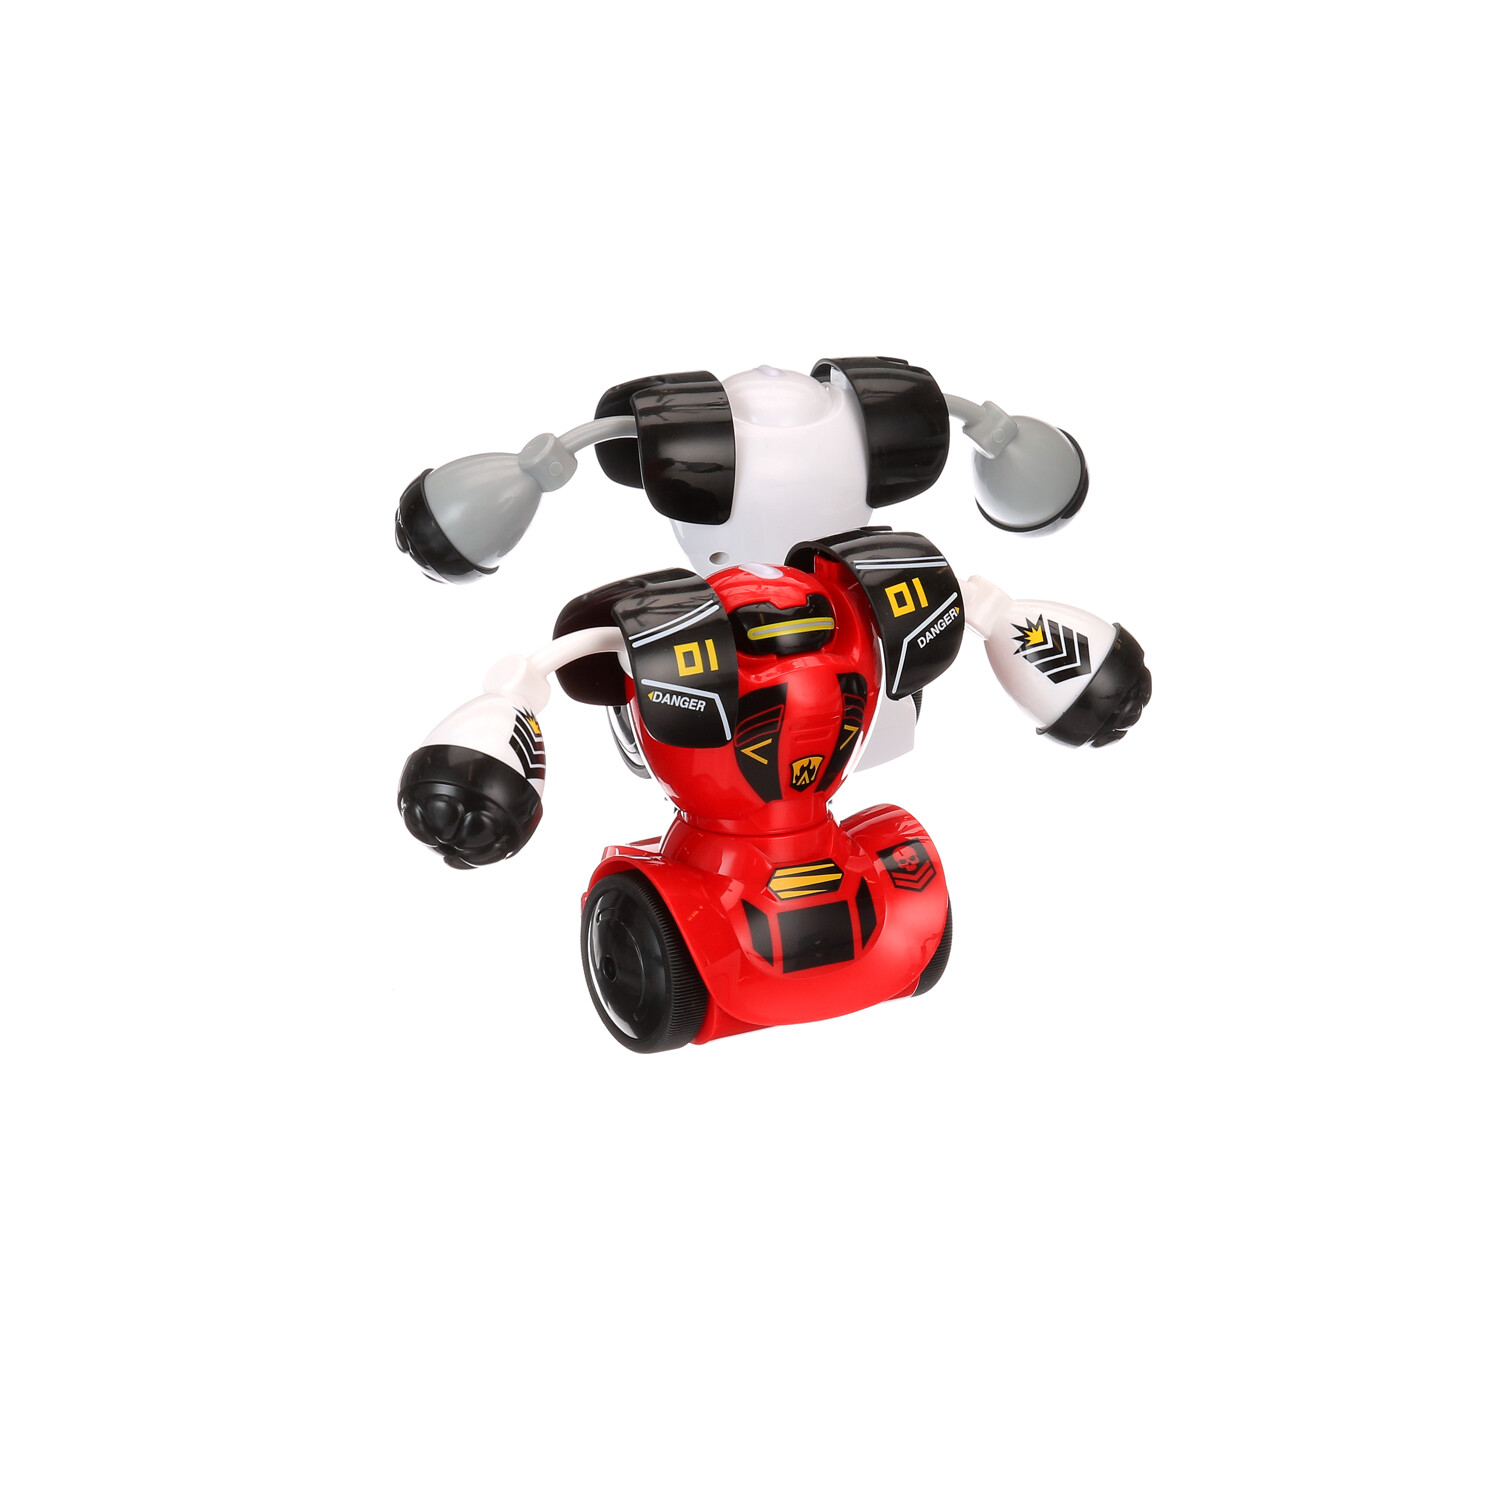 Sharper Image® Robot Combat Remote Control Robot Fighting Set, 4pcs - Red  And White 